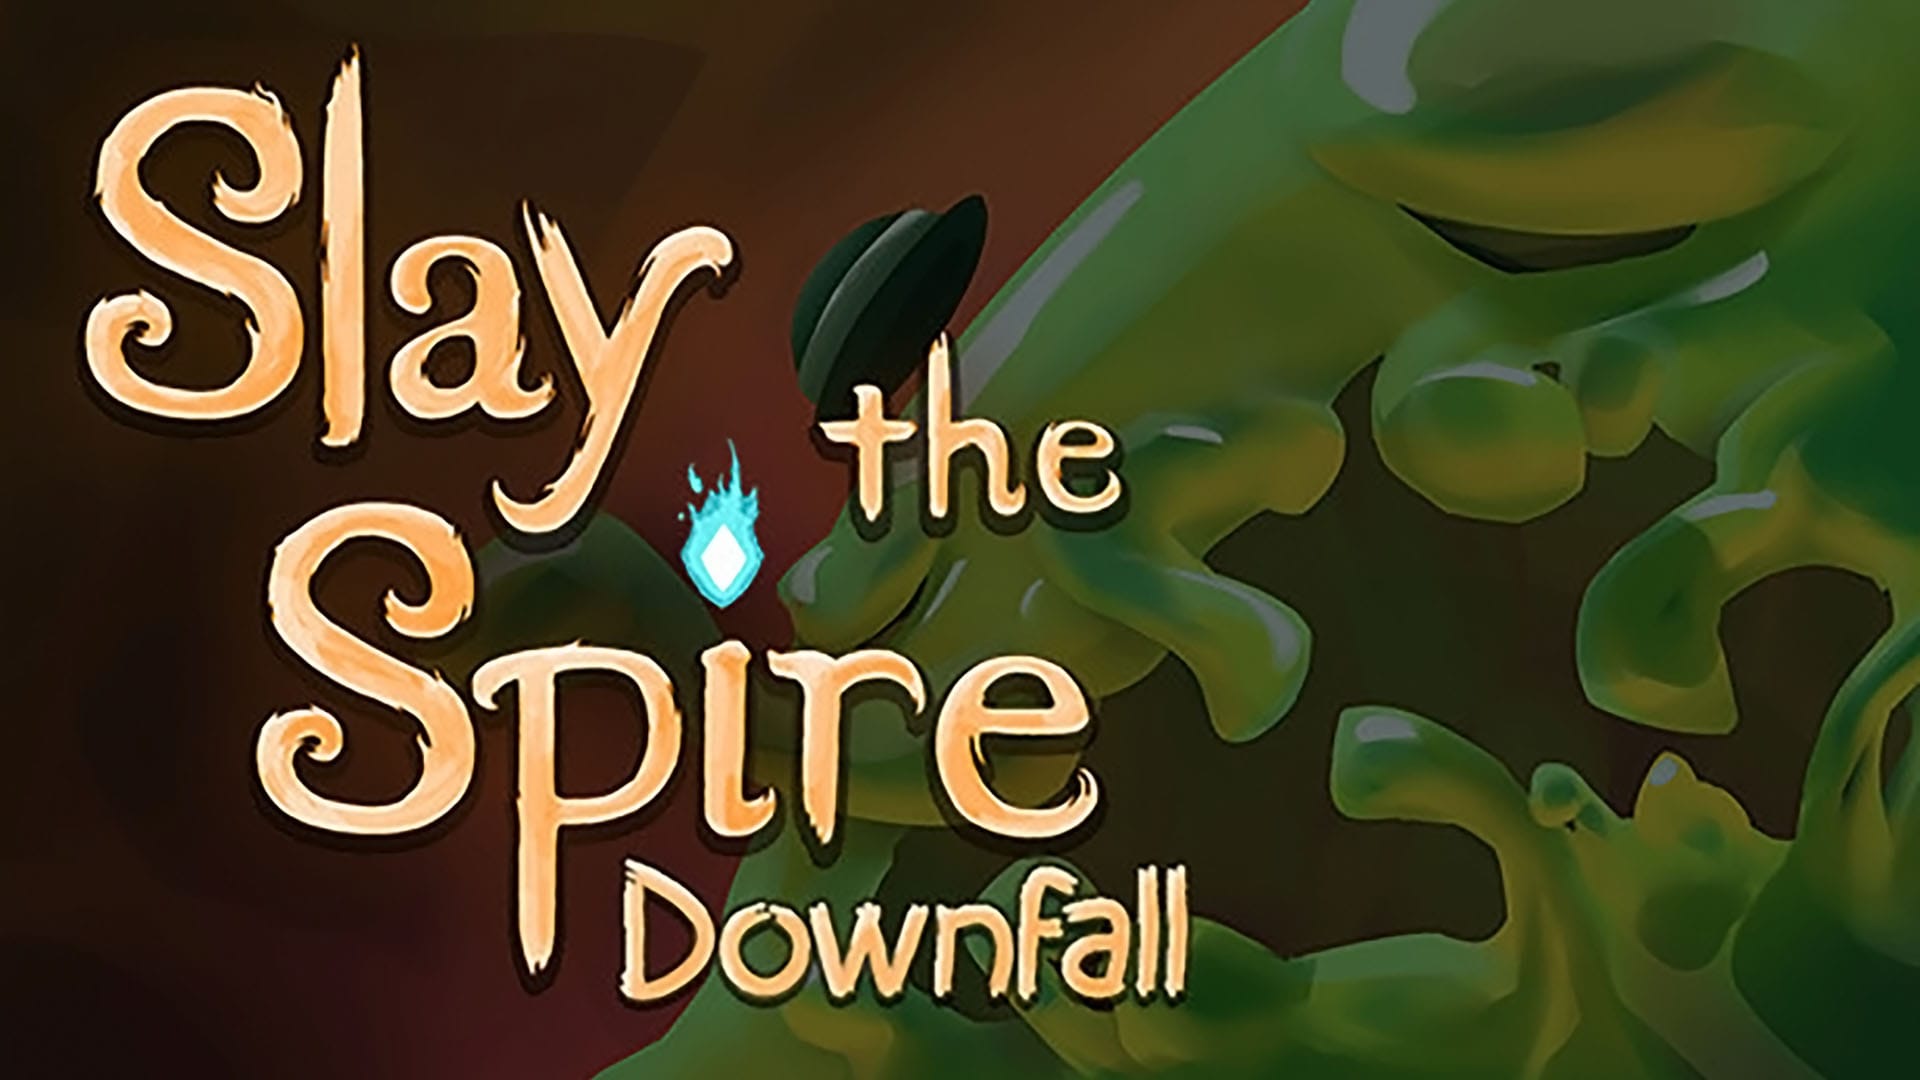 Slay the Spire Downfall Mod Suffered Security Breach and Some Users May Be at Risk